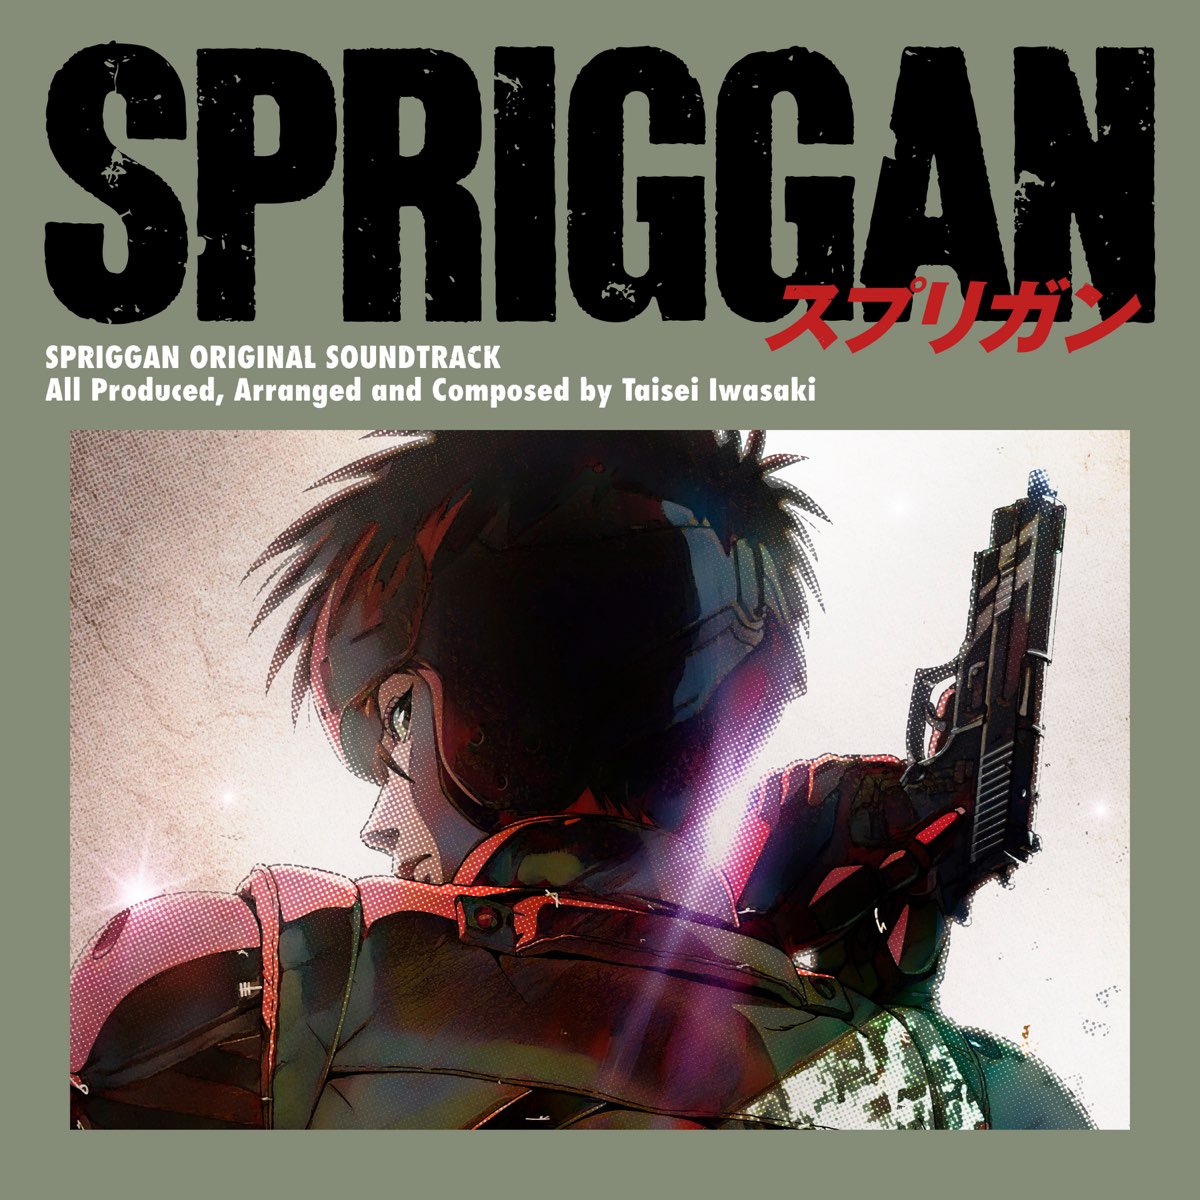 Music tracks, songs, playlists tagged spriggan on SoundCloud